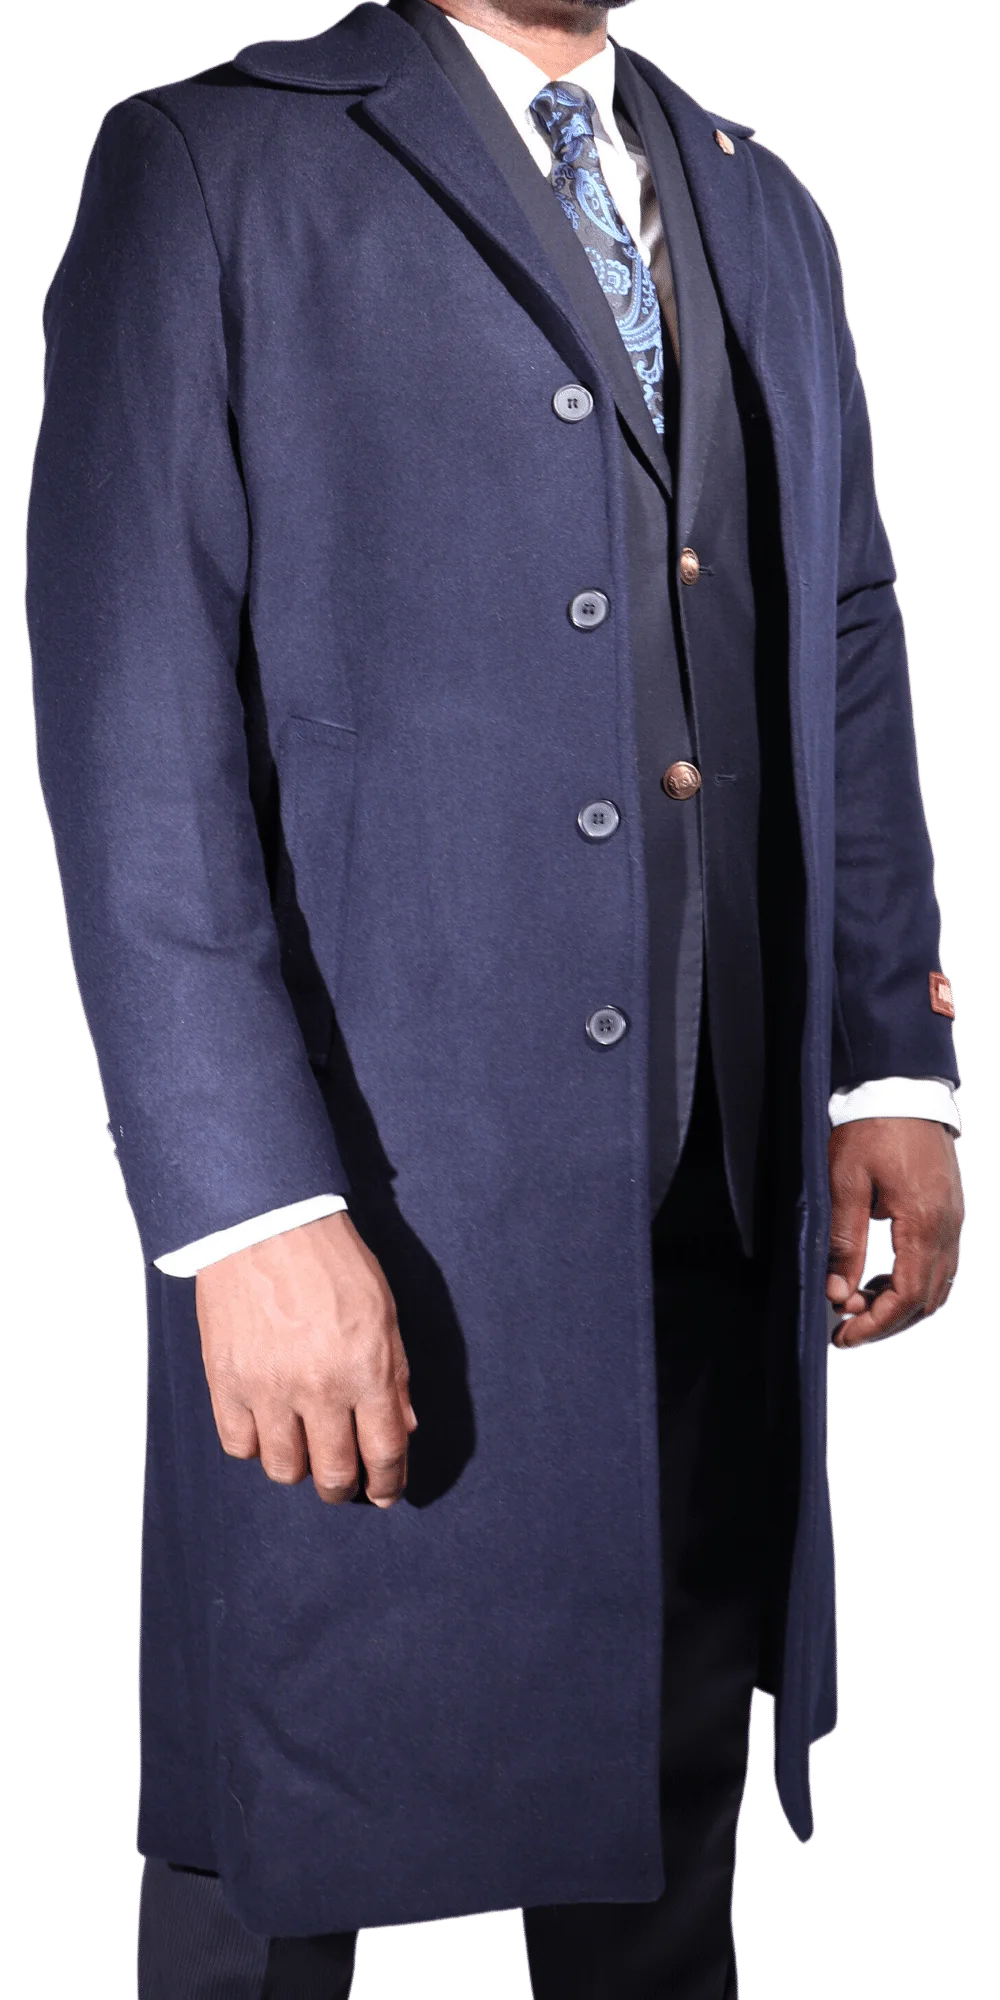 Men's Navada Clothing Cashmere Trenchcoat / overcoat in Navy (111) available in-store, 337 Monty Naicker Street, Durban CBD or online at Omar's Tailors & Outfitters online store.   A men's fashion curation for South African men - established in 1911.